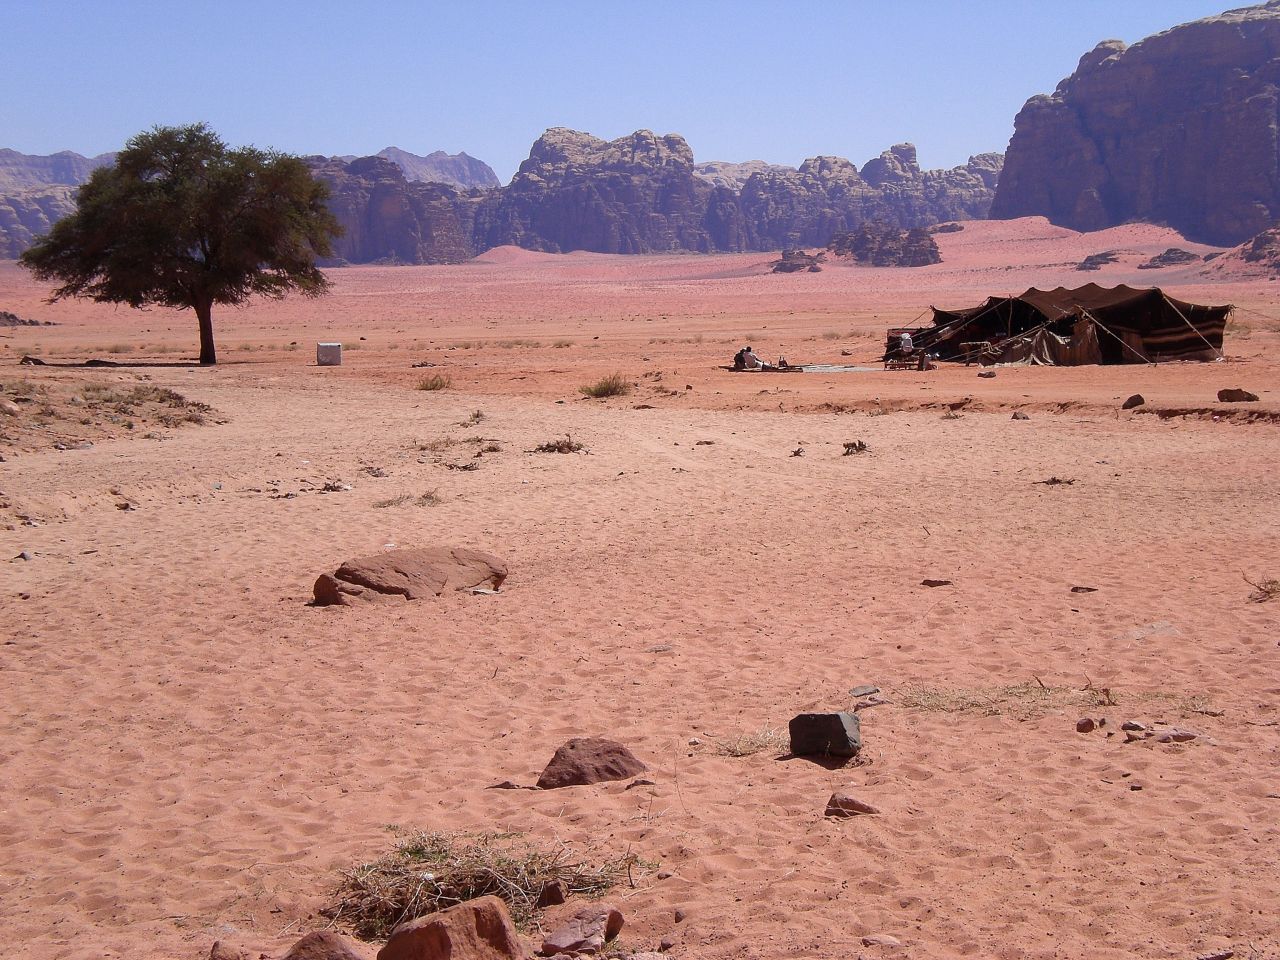 Look familiar? The high-rise cliffs and blush pink sands of Wadi Rum (pictured) played themselves in "Lawrence of Arabia." At 89,342 square kilometers, Jordan may be a relatively small country, but its vistas are the stuff of silver screen epics. 